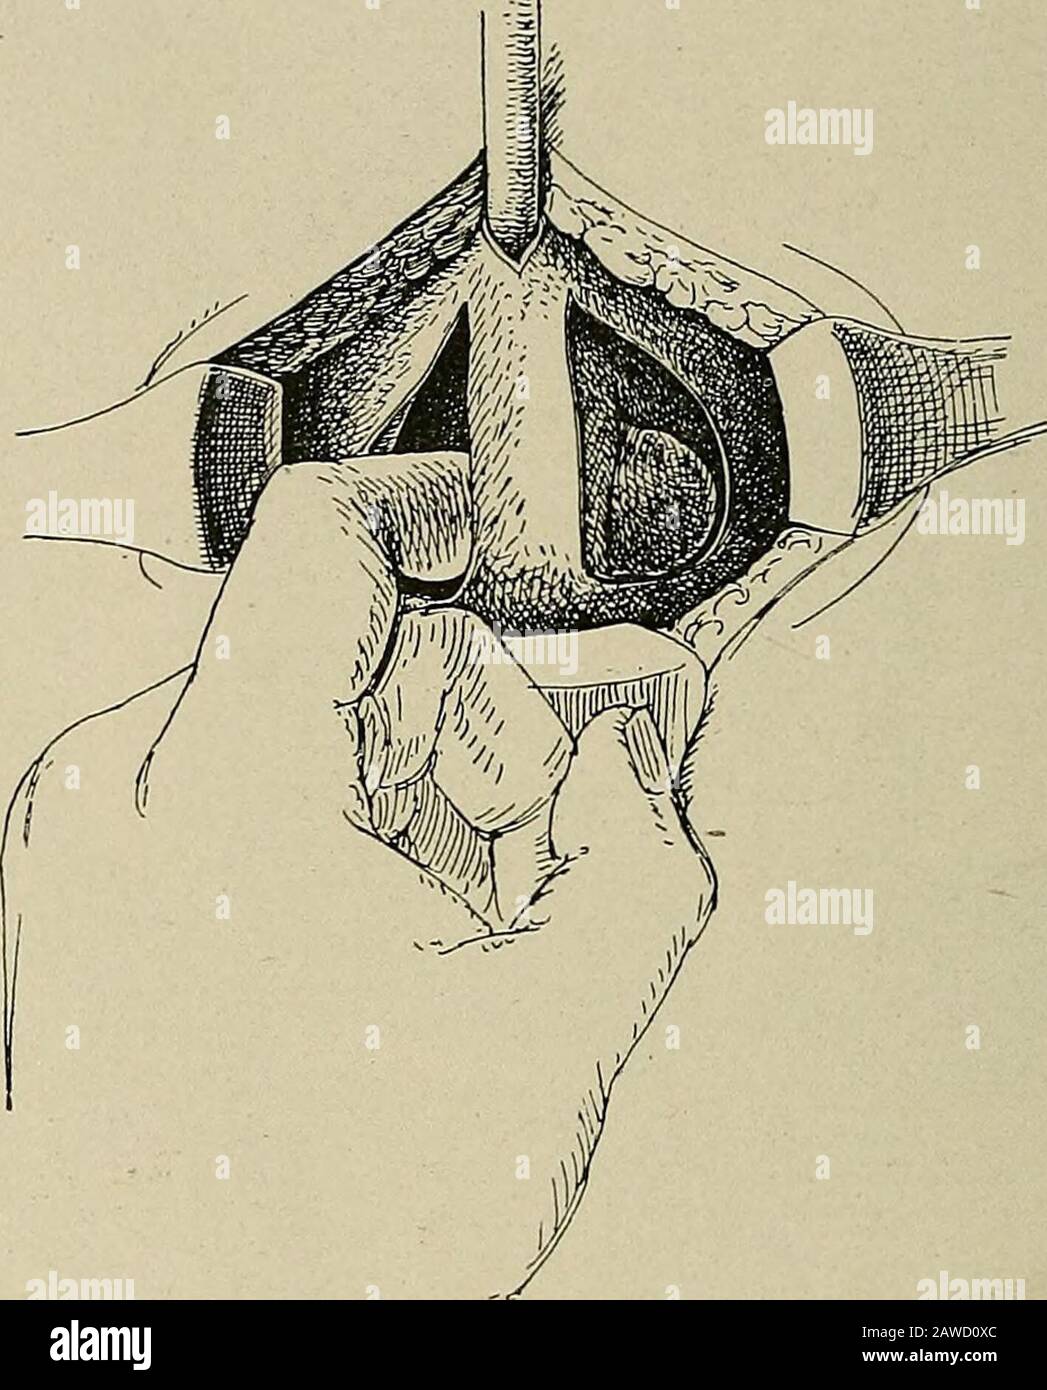 Operative surgery, for students and practitioners . Fig. 316.—Perineal Prostatectomy (Young). Membranous urethra opened justanterior to prostate and tractor introduced. Incision through the sheath ofprostate. Detaching the sheath from the right lobe with the blunt dissector. 702 URINARY SYSTEM. injur)^ The incisions, being 1 cm. deep, reach into the substance ofthe prostate beyond the level of the ducts and close to the sides of theurethral canal. The fibrous sheath is separated from the prostate with the bluntdissector. It is important to start in the correct line of cleavage.As this step of Stock Photo